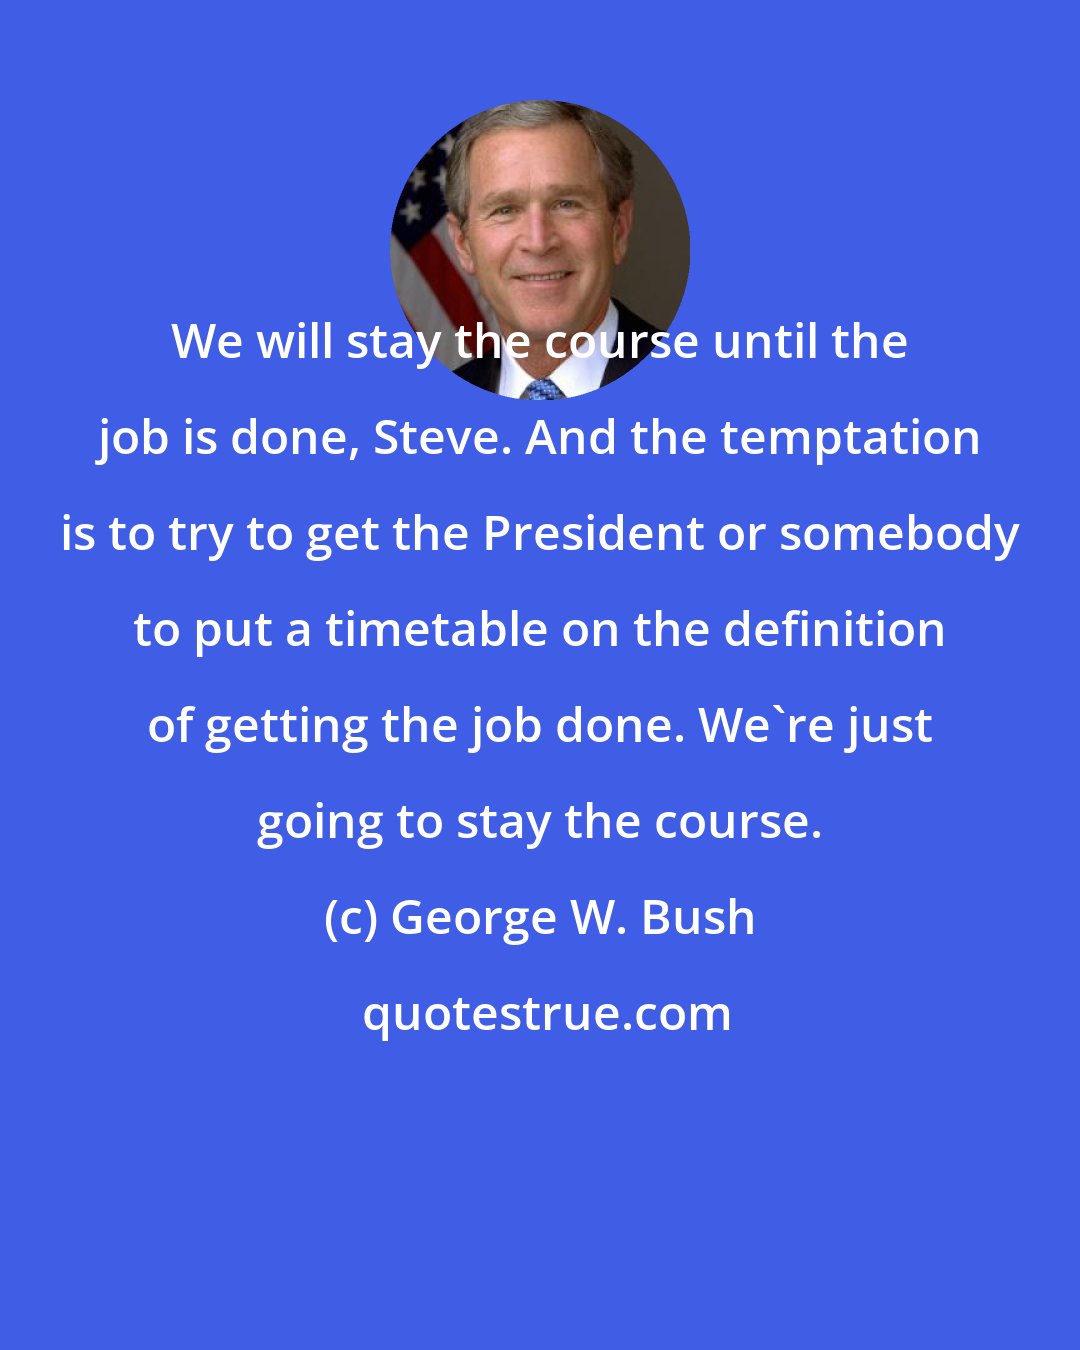 George W. Bush: We will stay the course until the job is done, Steve. And the temptation is to try to get the President or somebody to put a timetable on the definition of getting the job done. We're just going to stay the course.